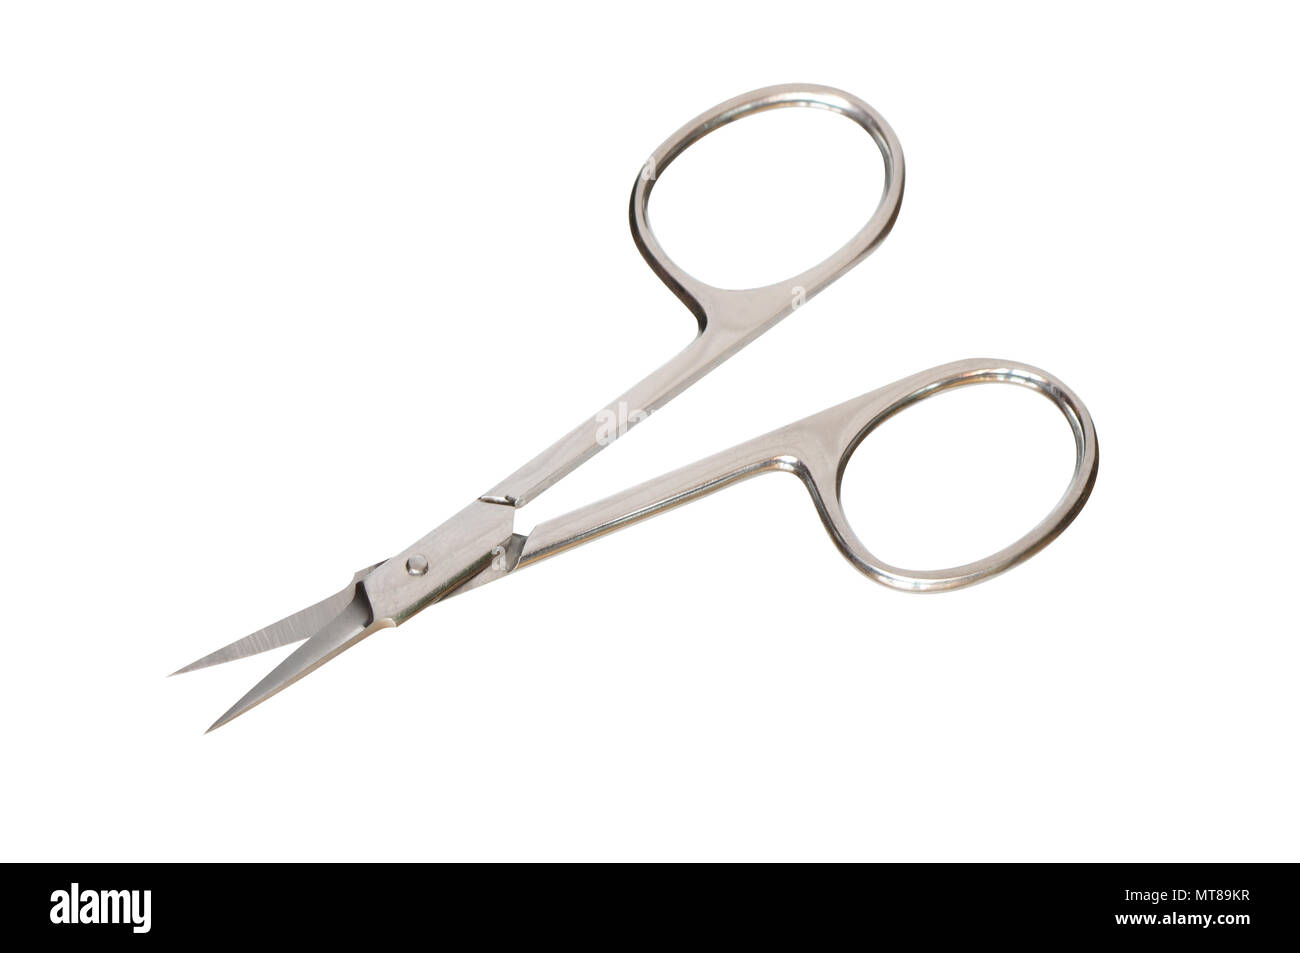 Small steel manicure scissors isolated on white with clipping path Stock Photo